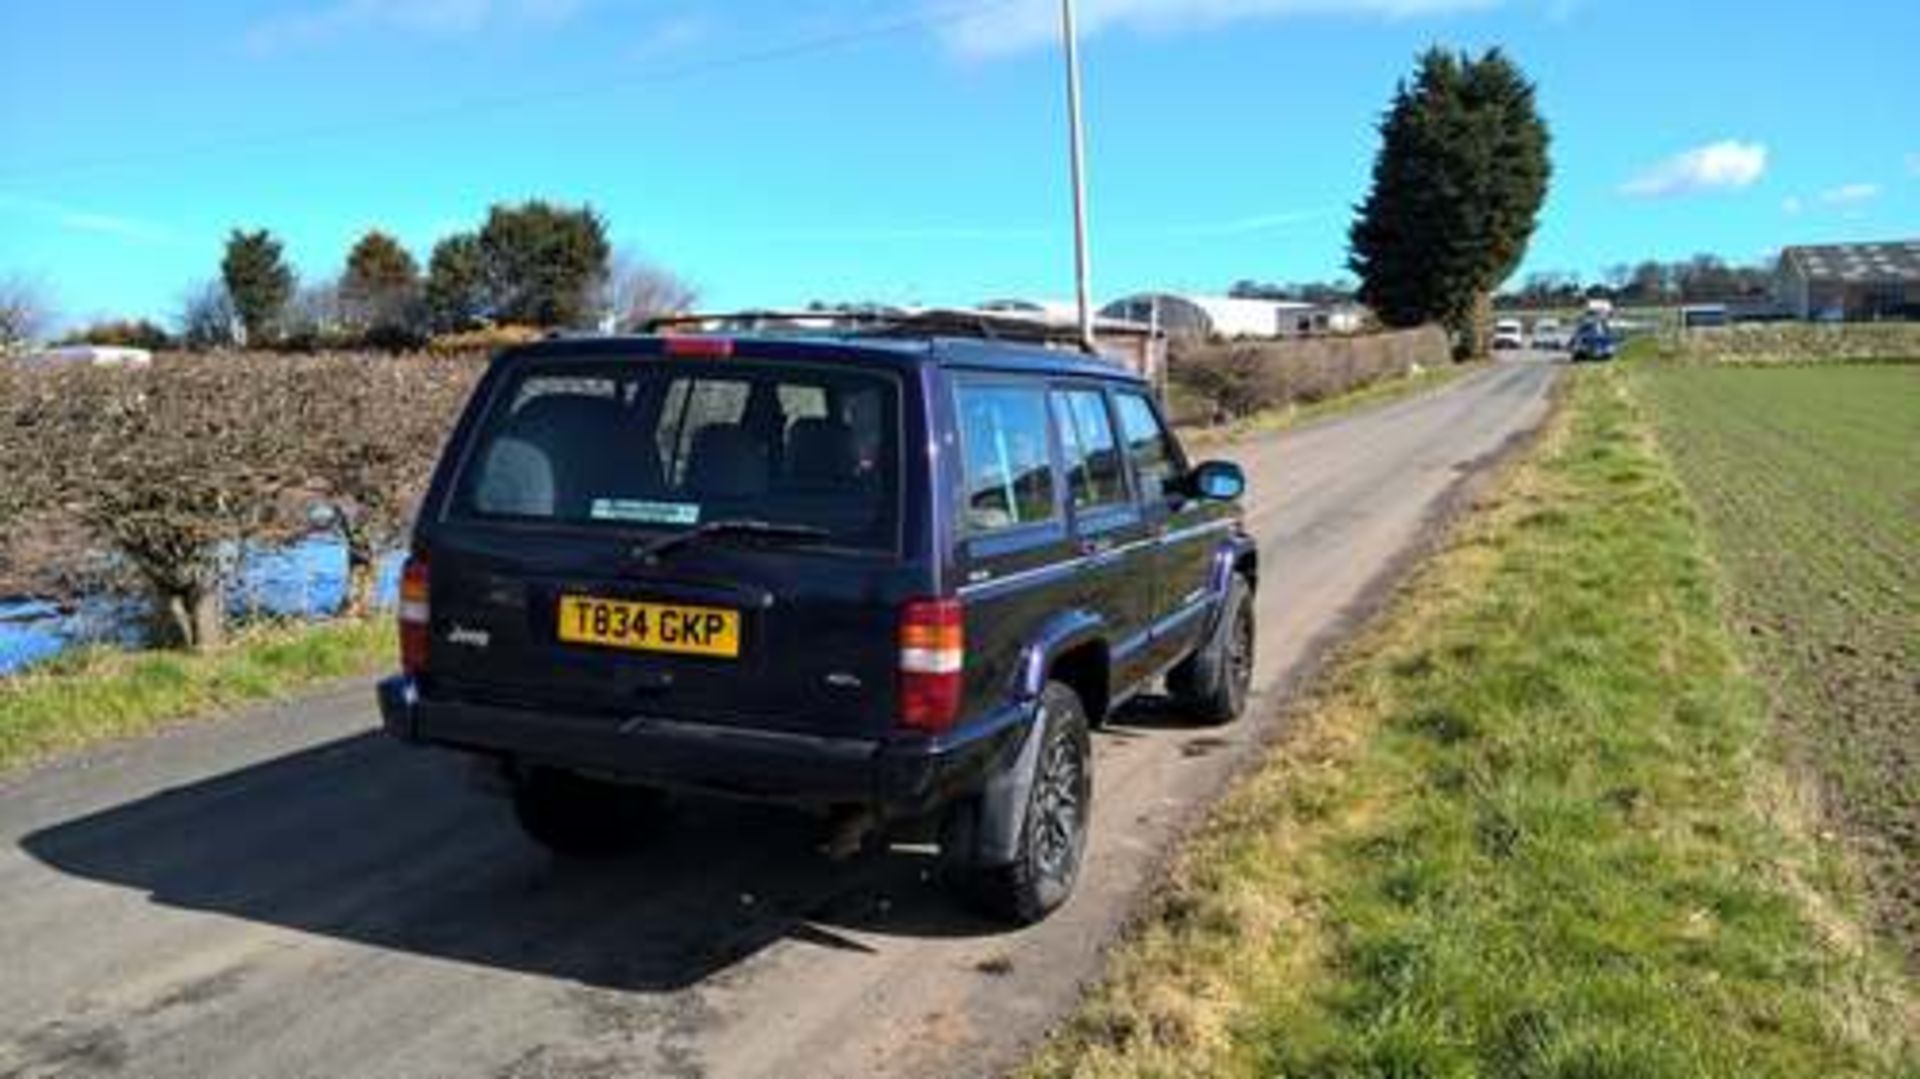 JEEP CHEROKEE LIMITED A - 3960cc - Image 8 of 18